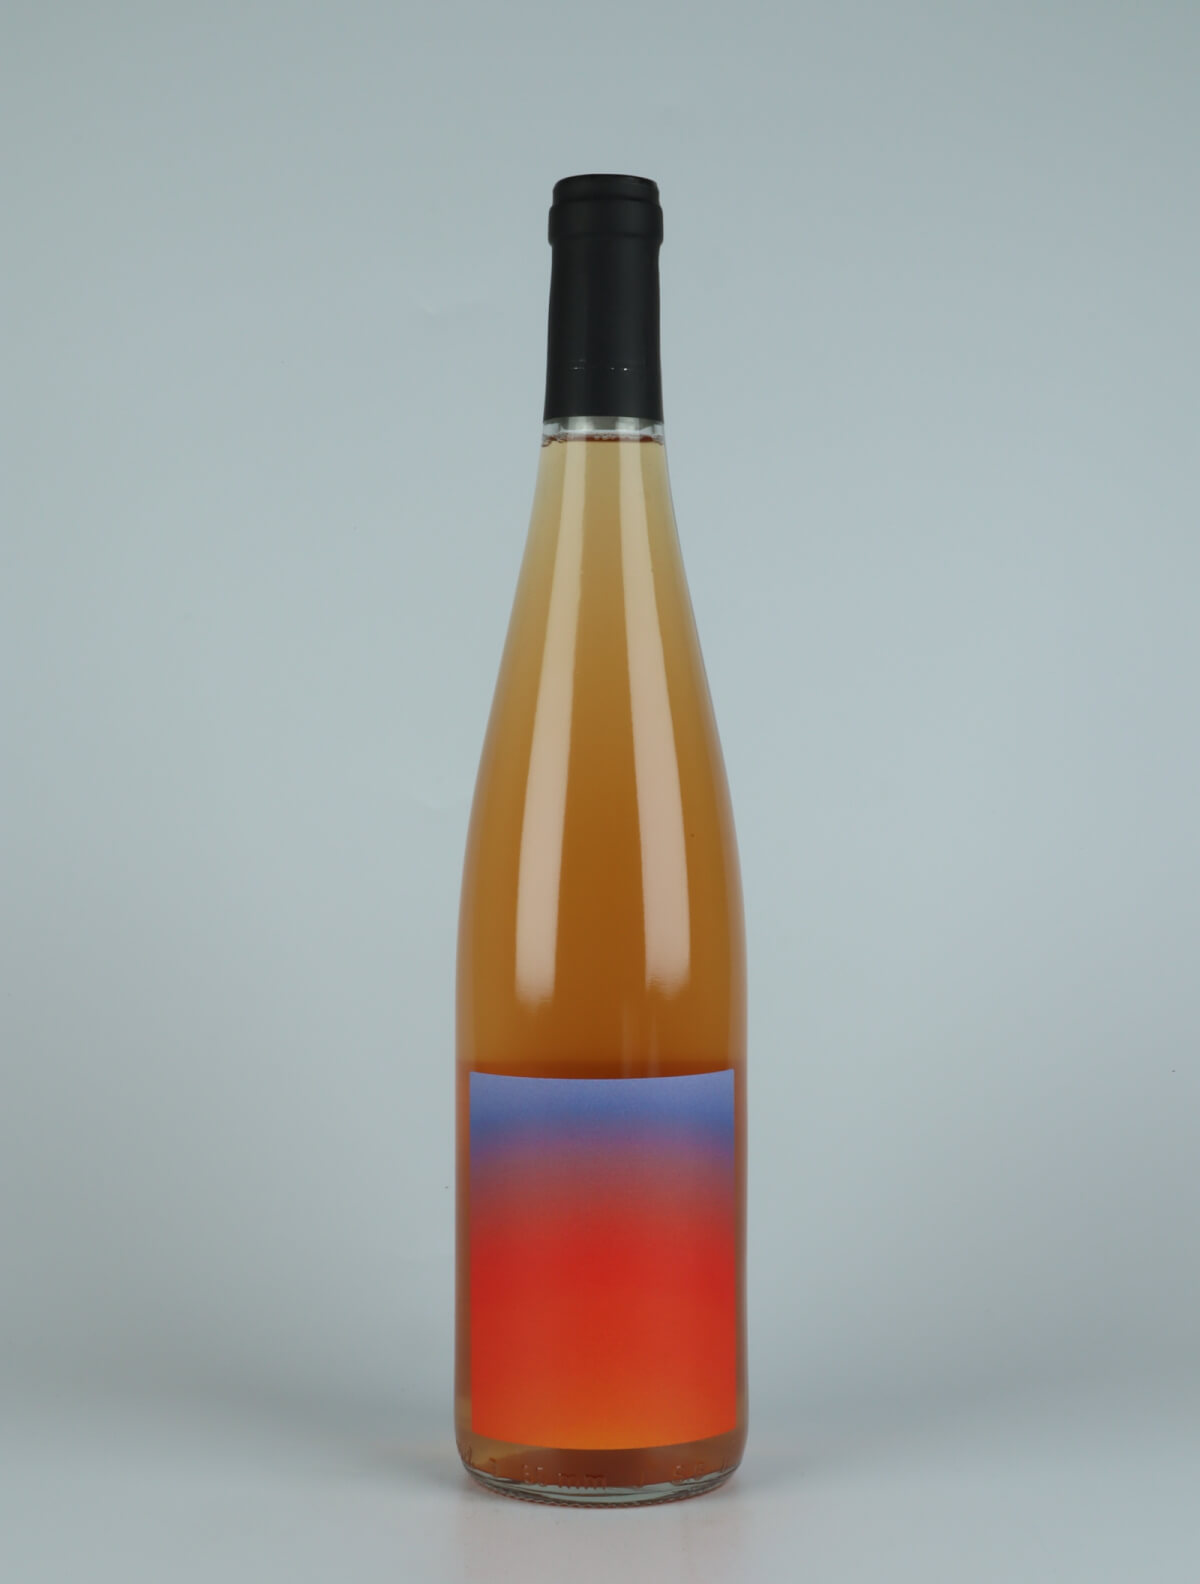 A bottle 2021 L’Impatient Orange wine from Domaine Goepp, Alsace in France